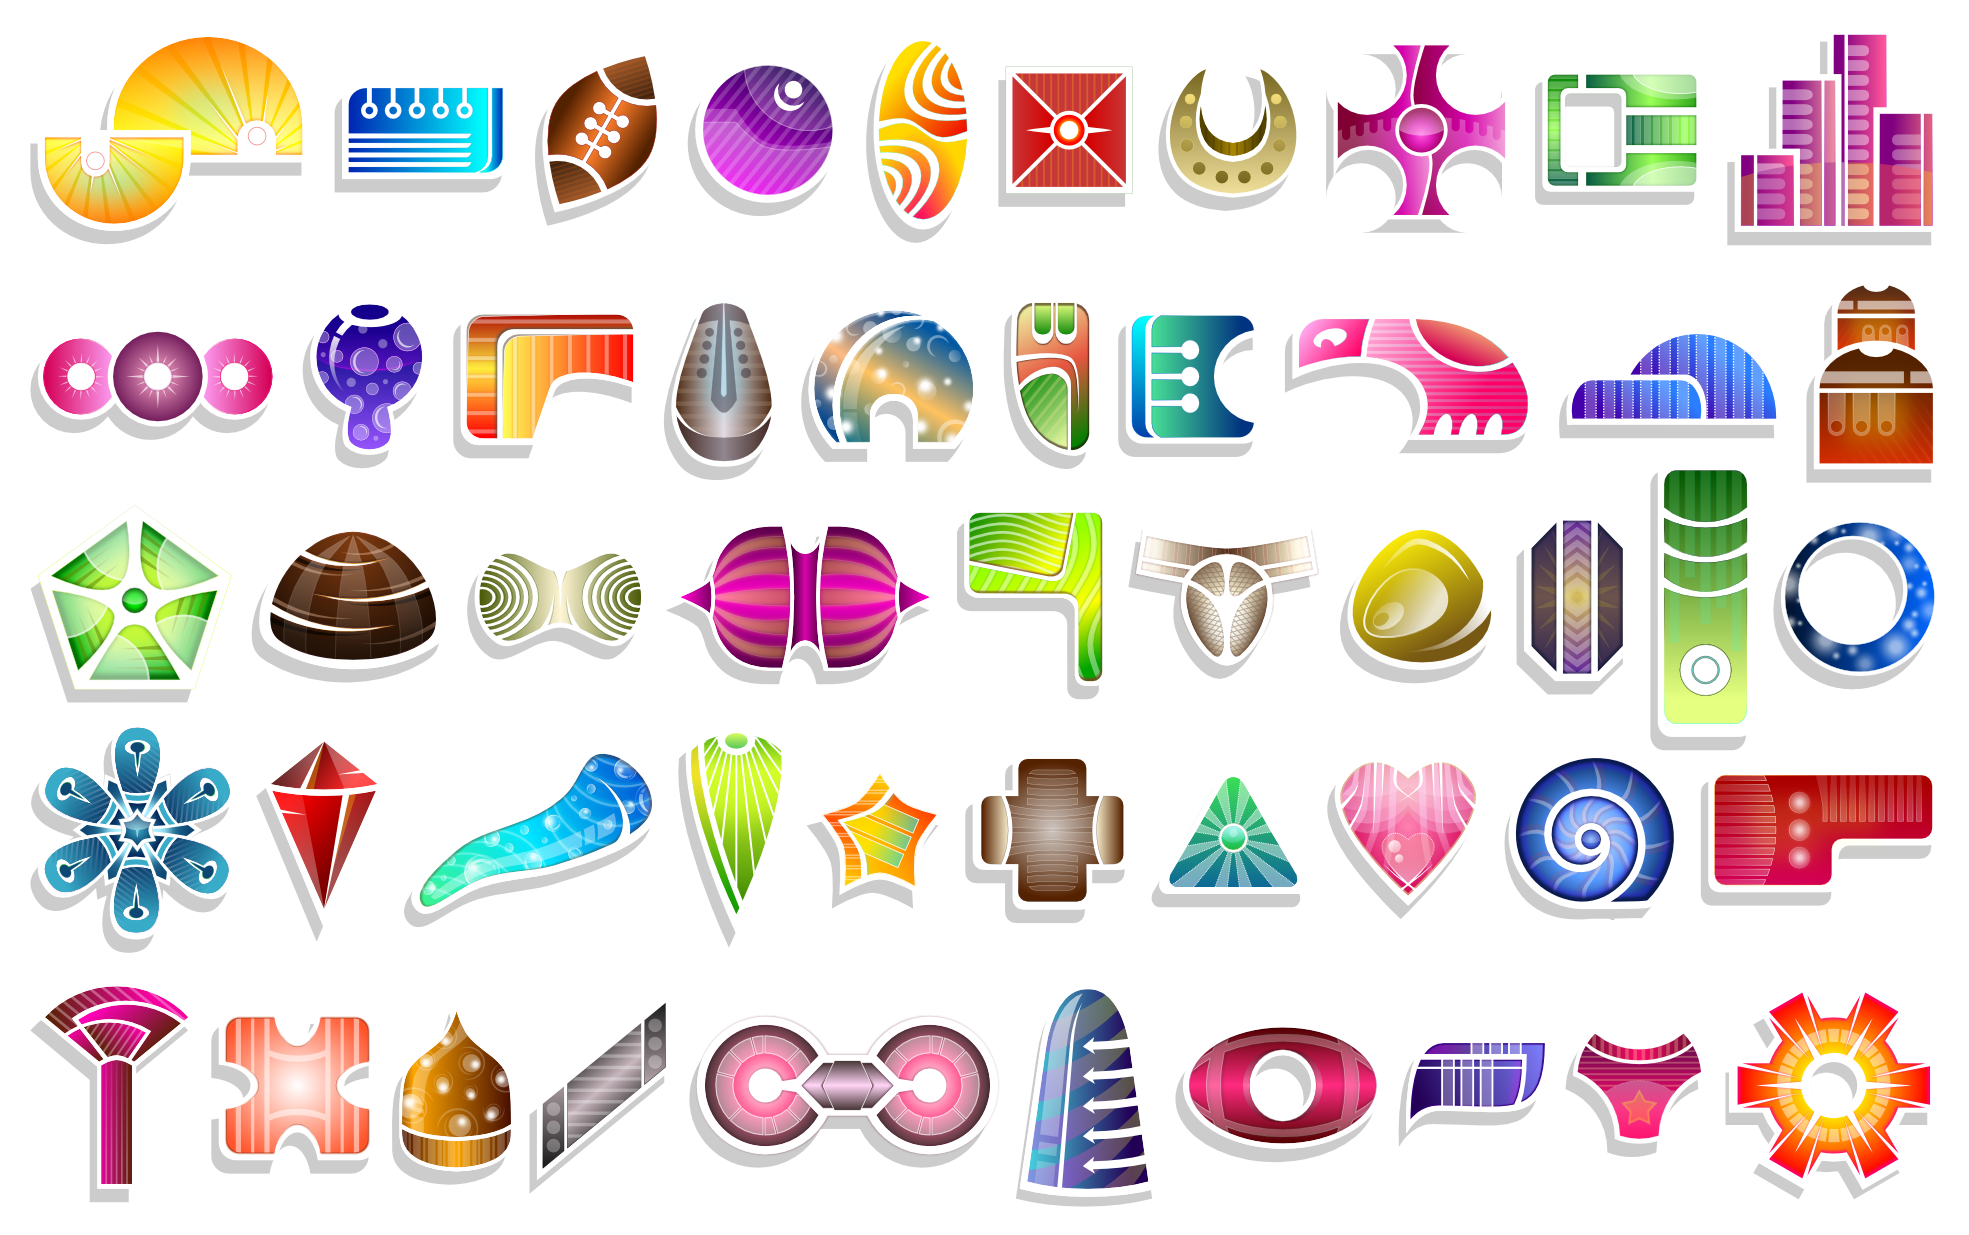 clipart shapes creative